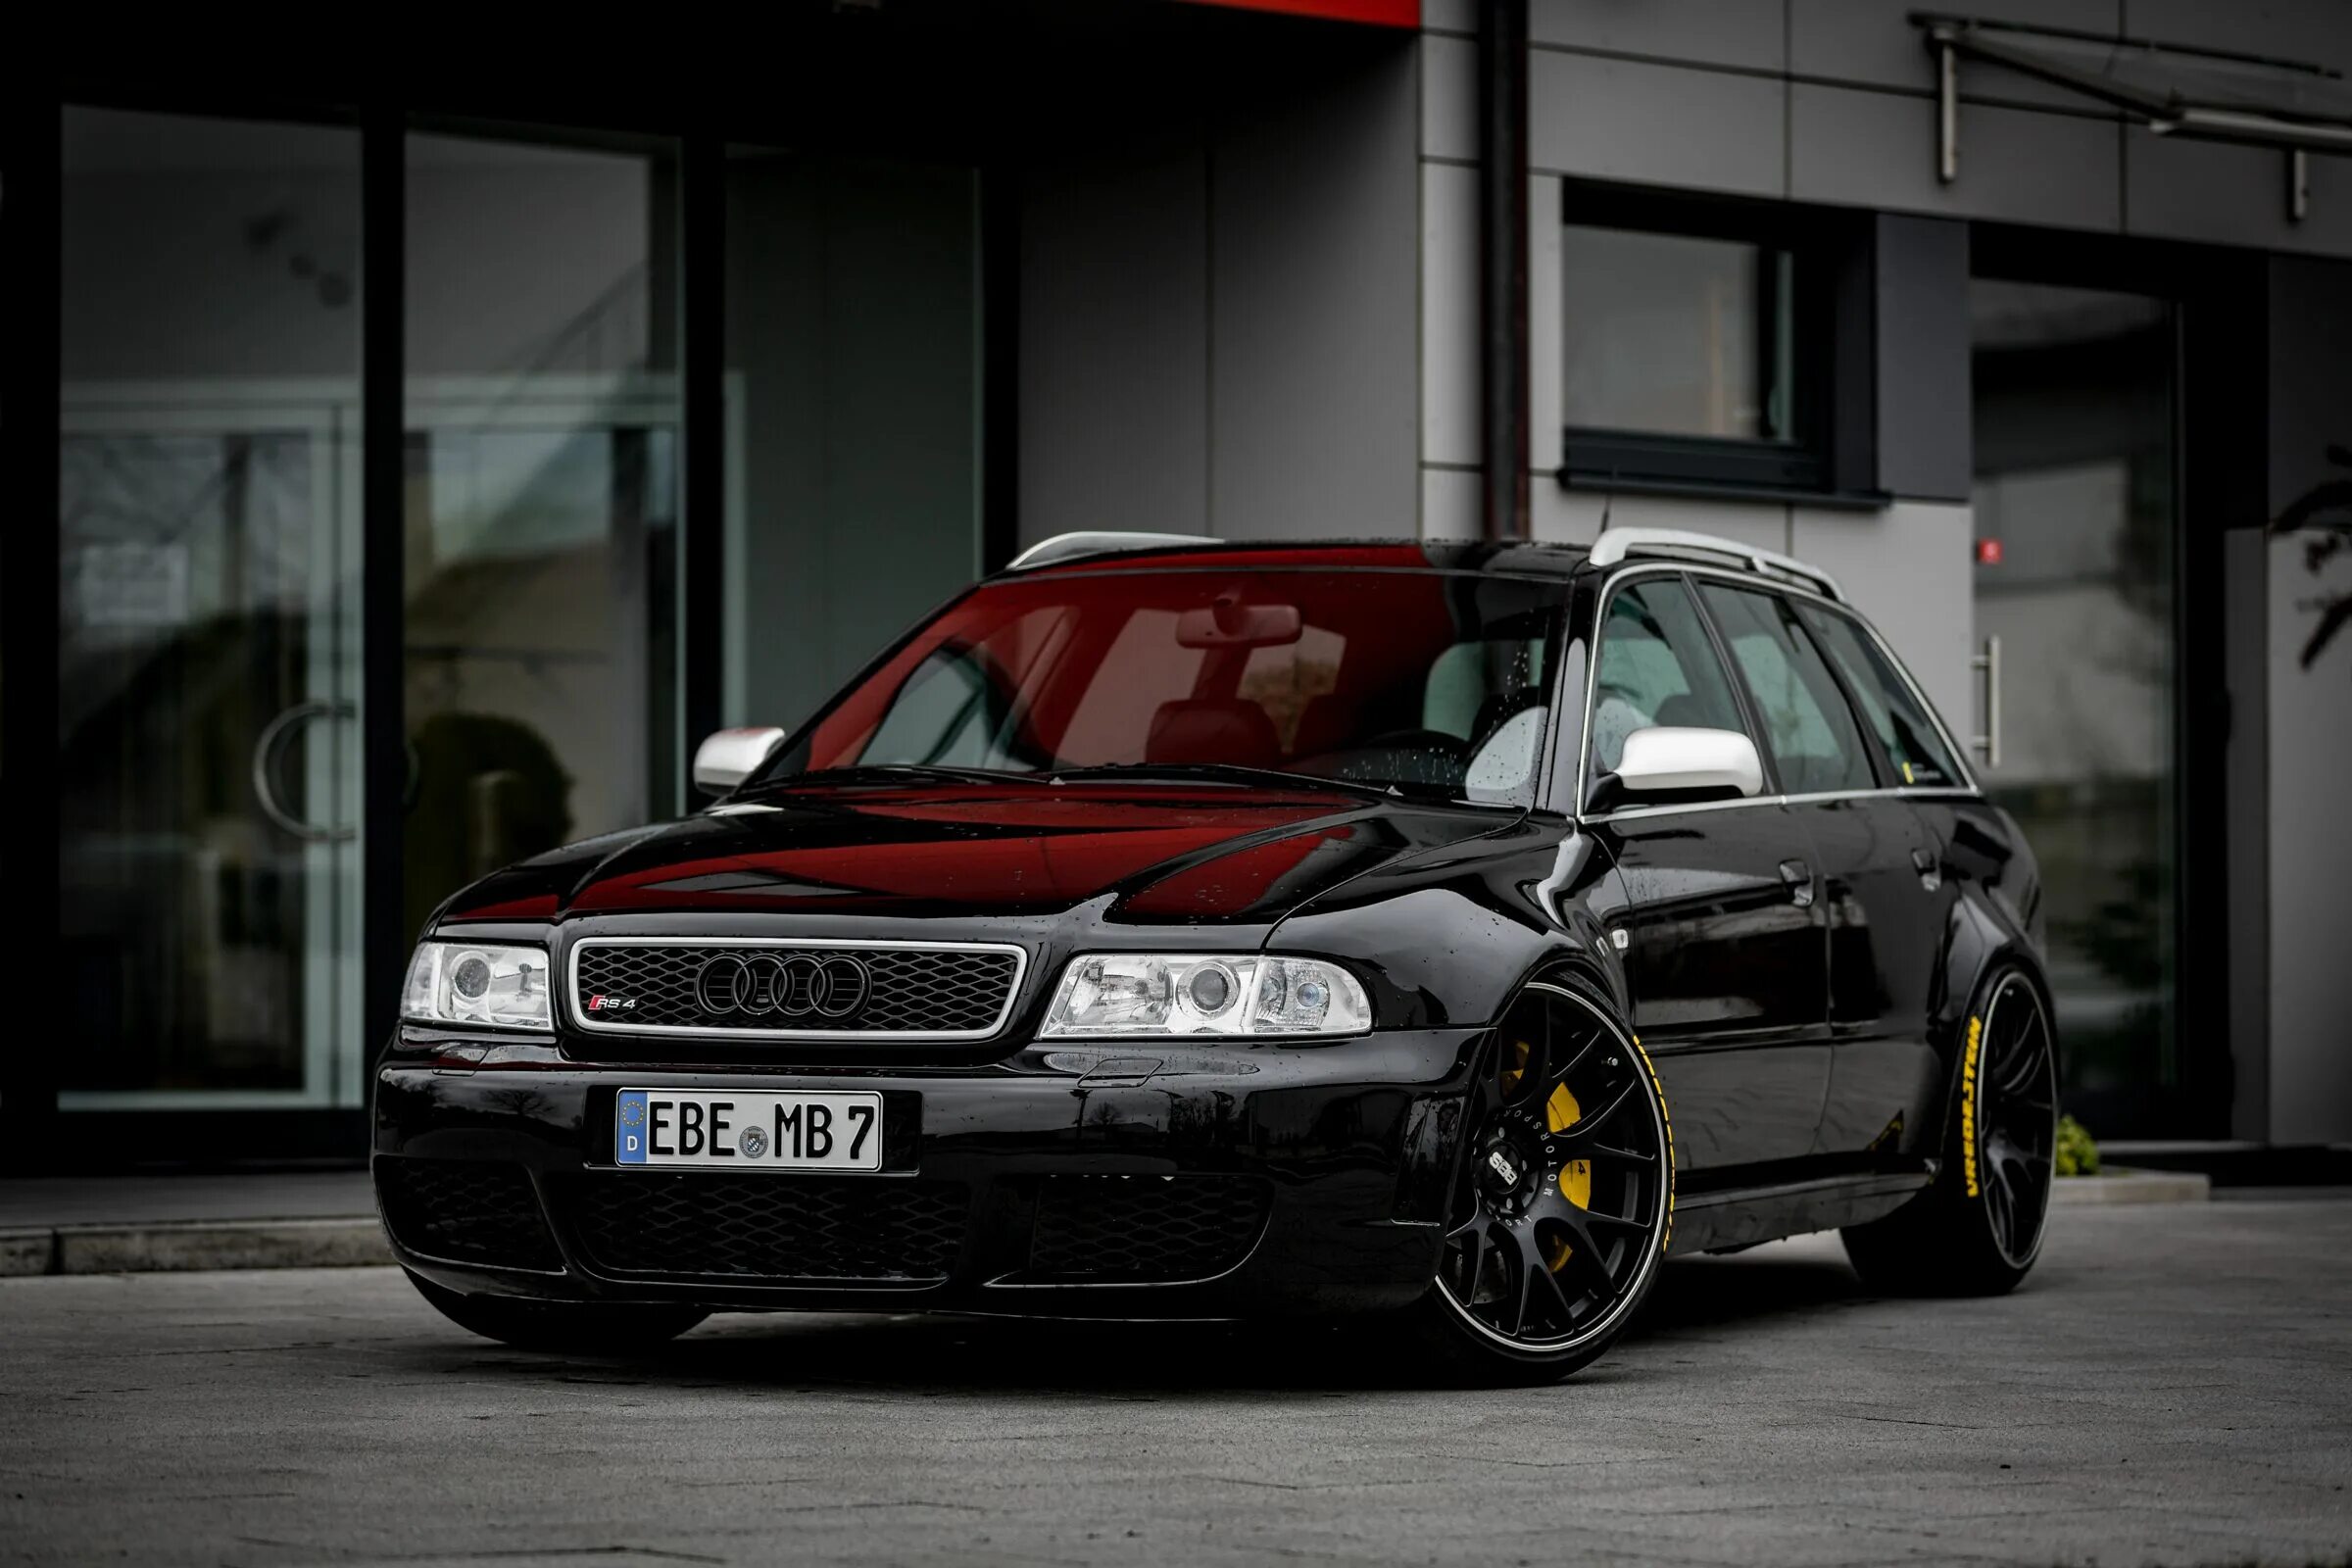 B 5 b2 7. Audi rs4 b5. Audi rs4 b5 Black. Audi a4 b5 rs4 b5. Audi a4/rs4 (b5.